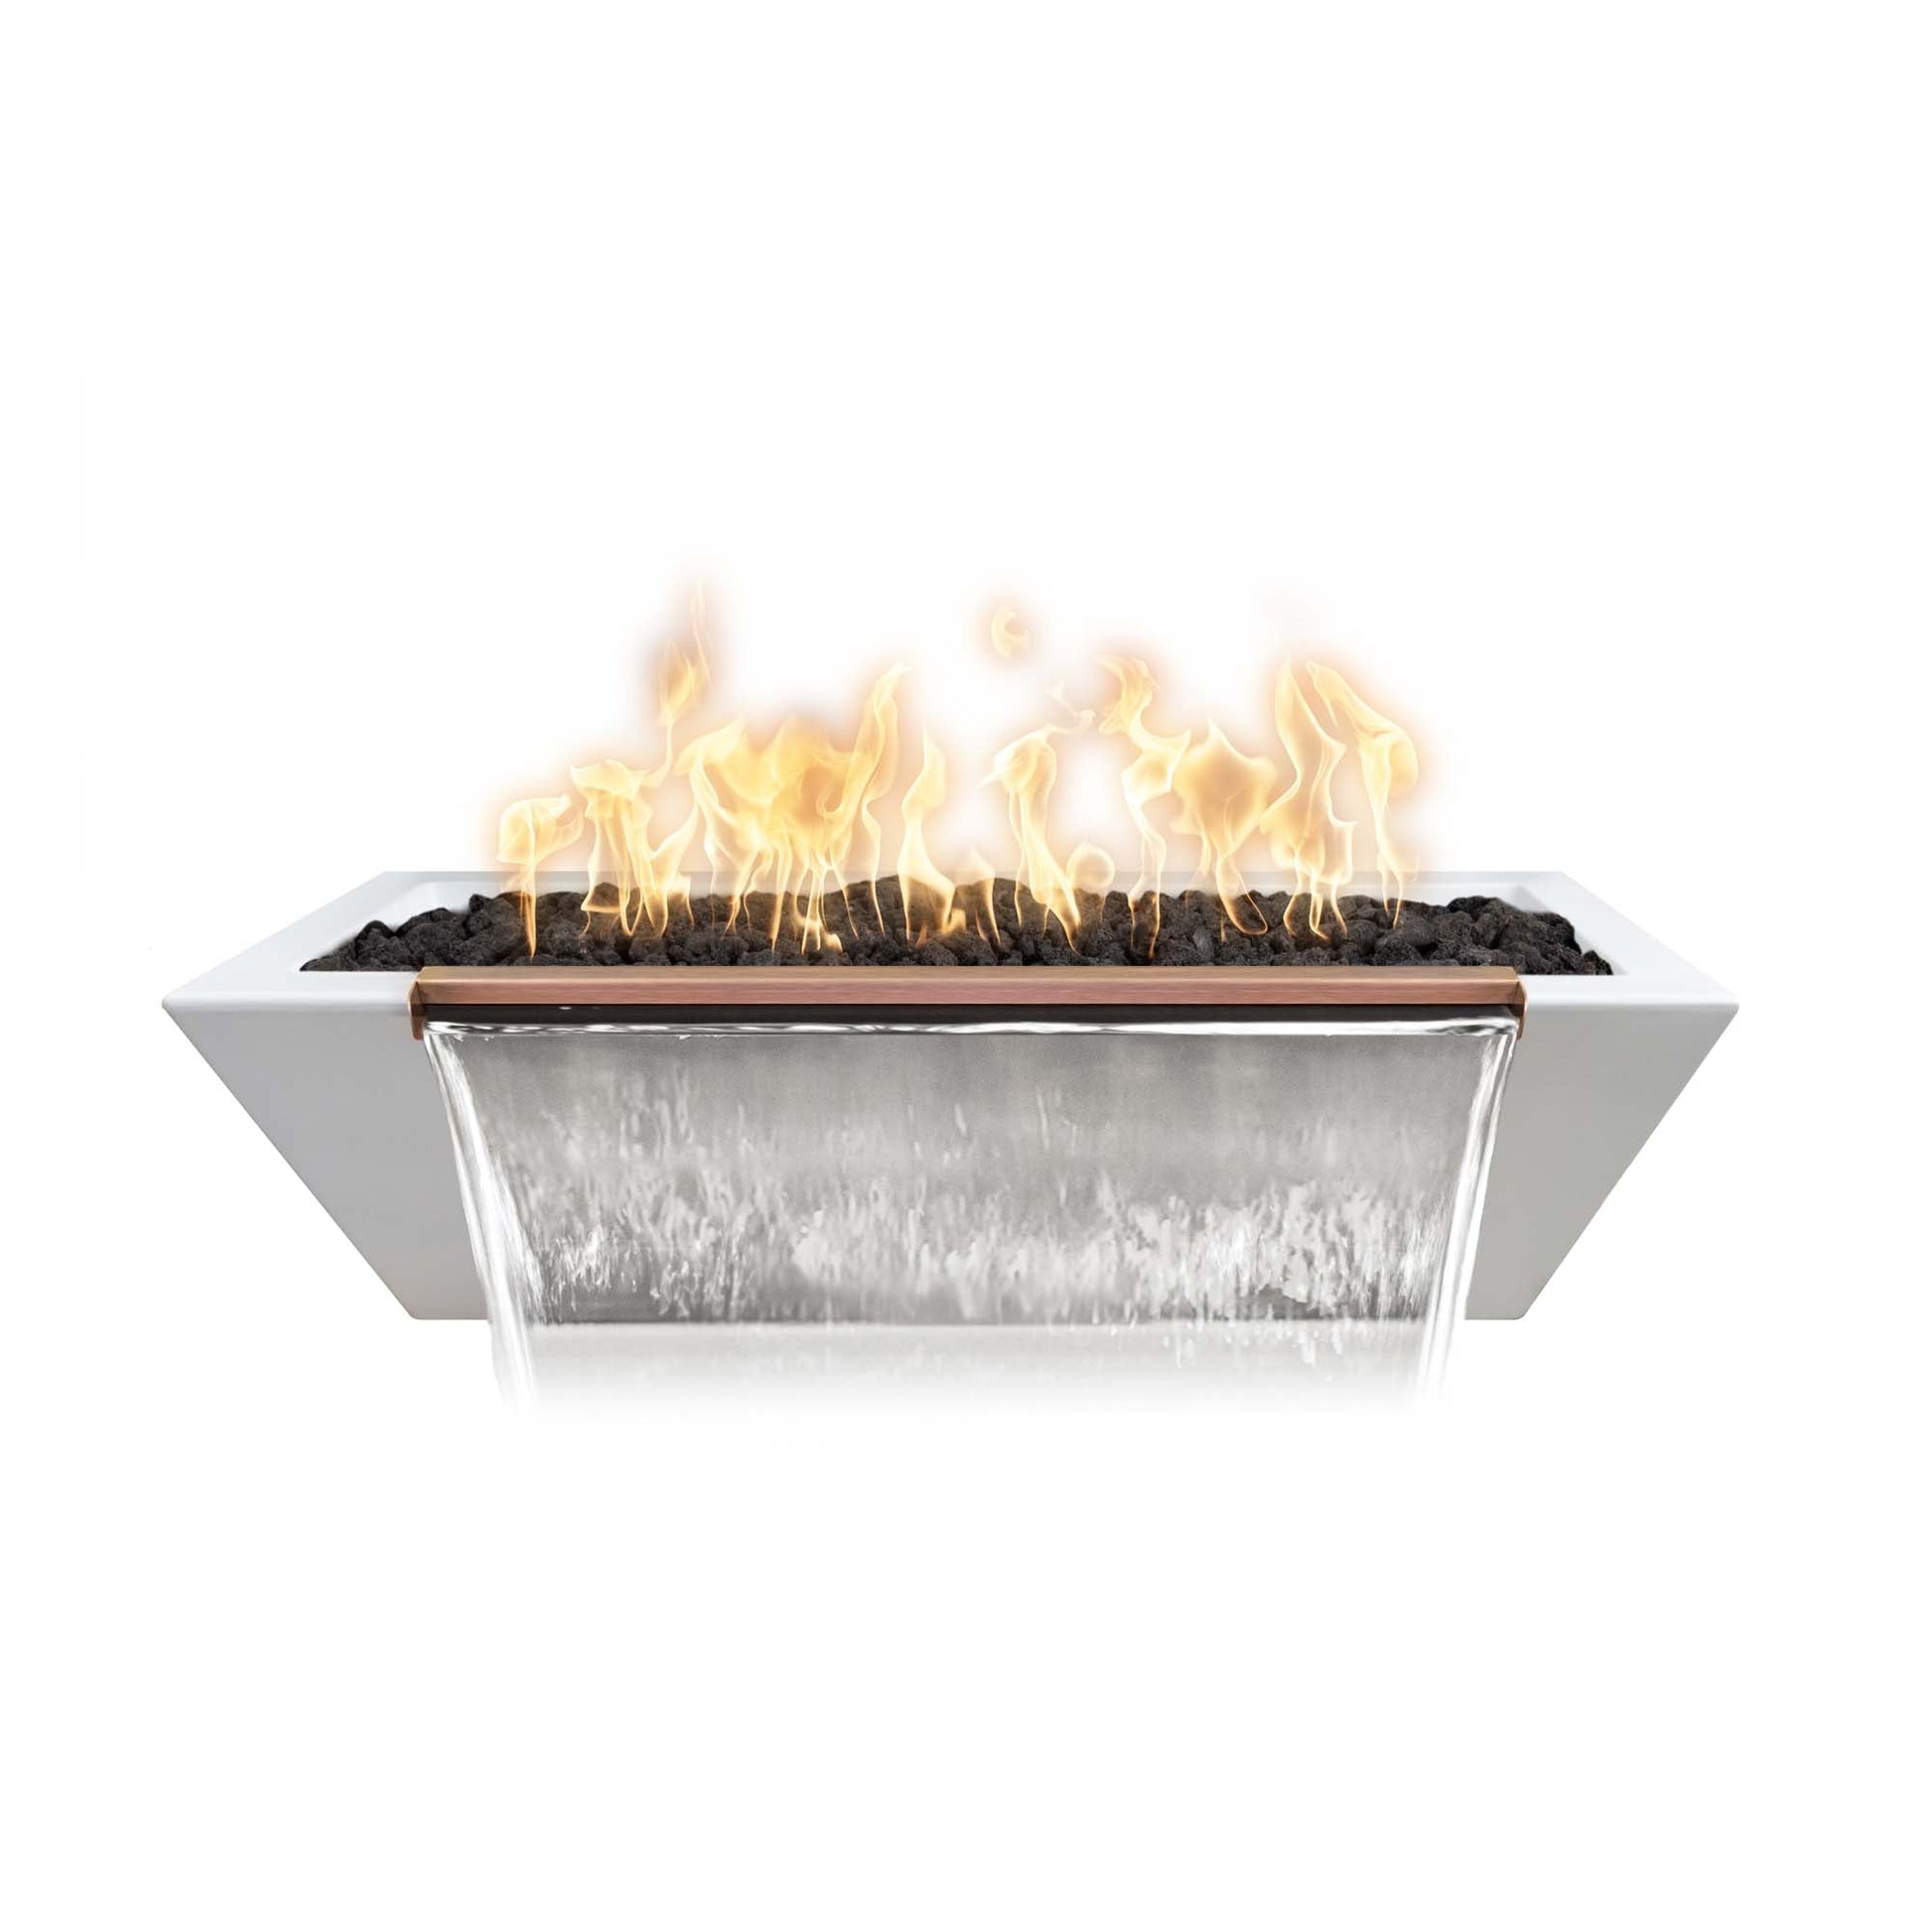 The Outdoor Plus Linear Maya 72" Rustic White GFRC Concrete Liquid Propane Fire & Water Bowl with 12V Electronic Ignition